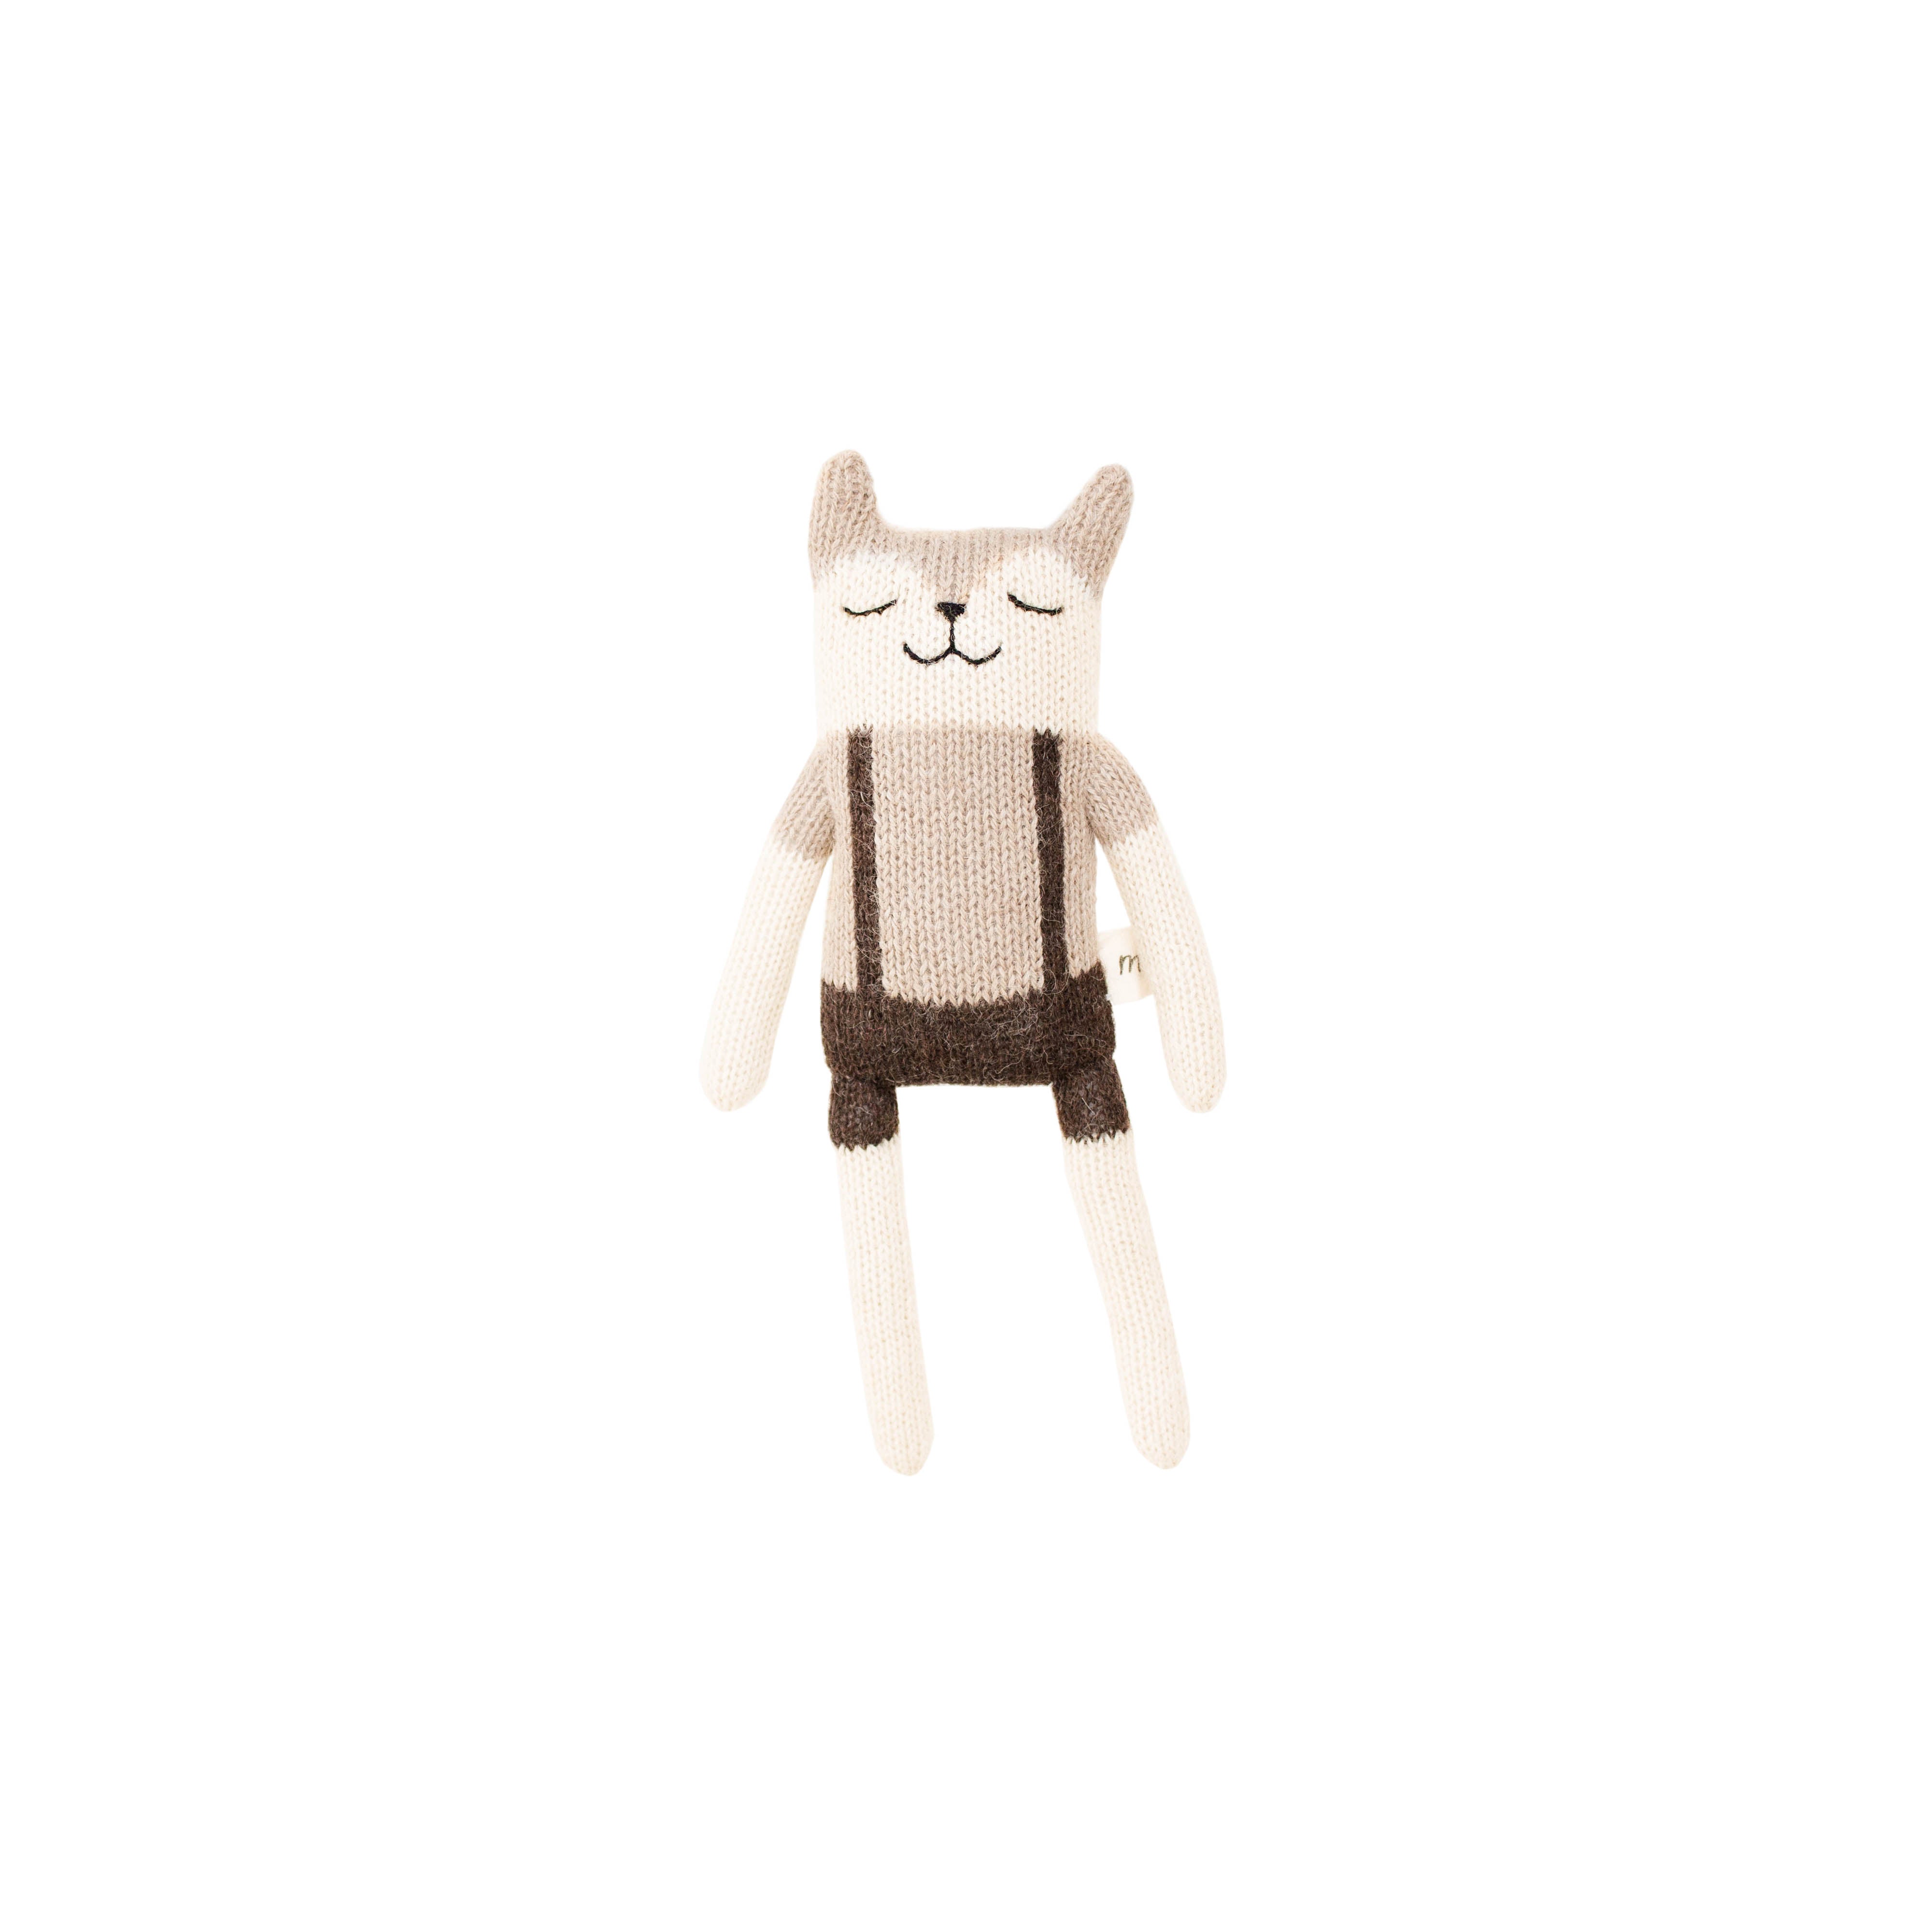 Main Sauvage Fawn Soft Toy - Overalls